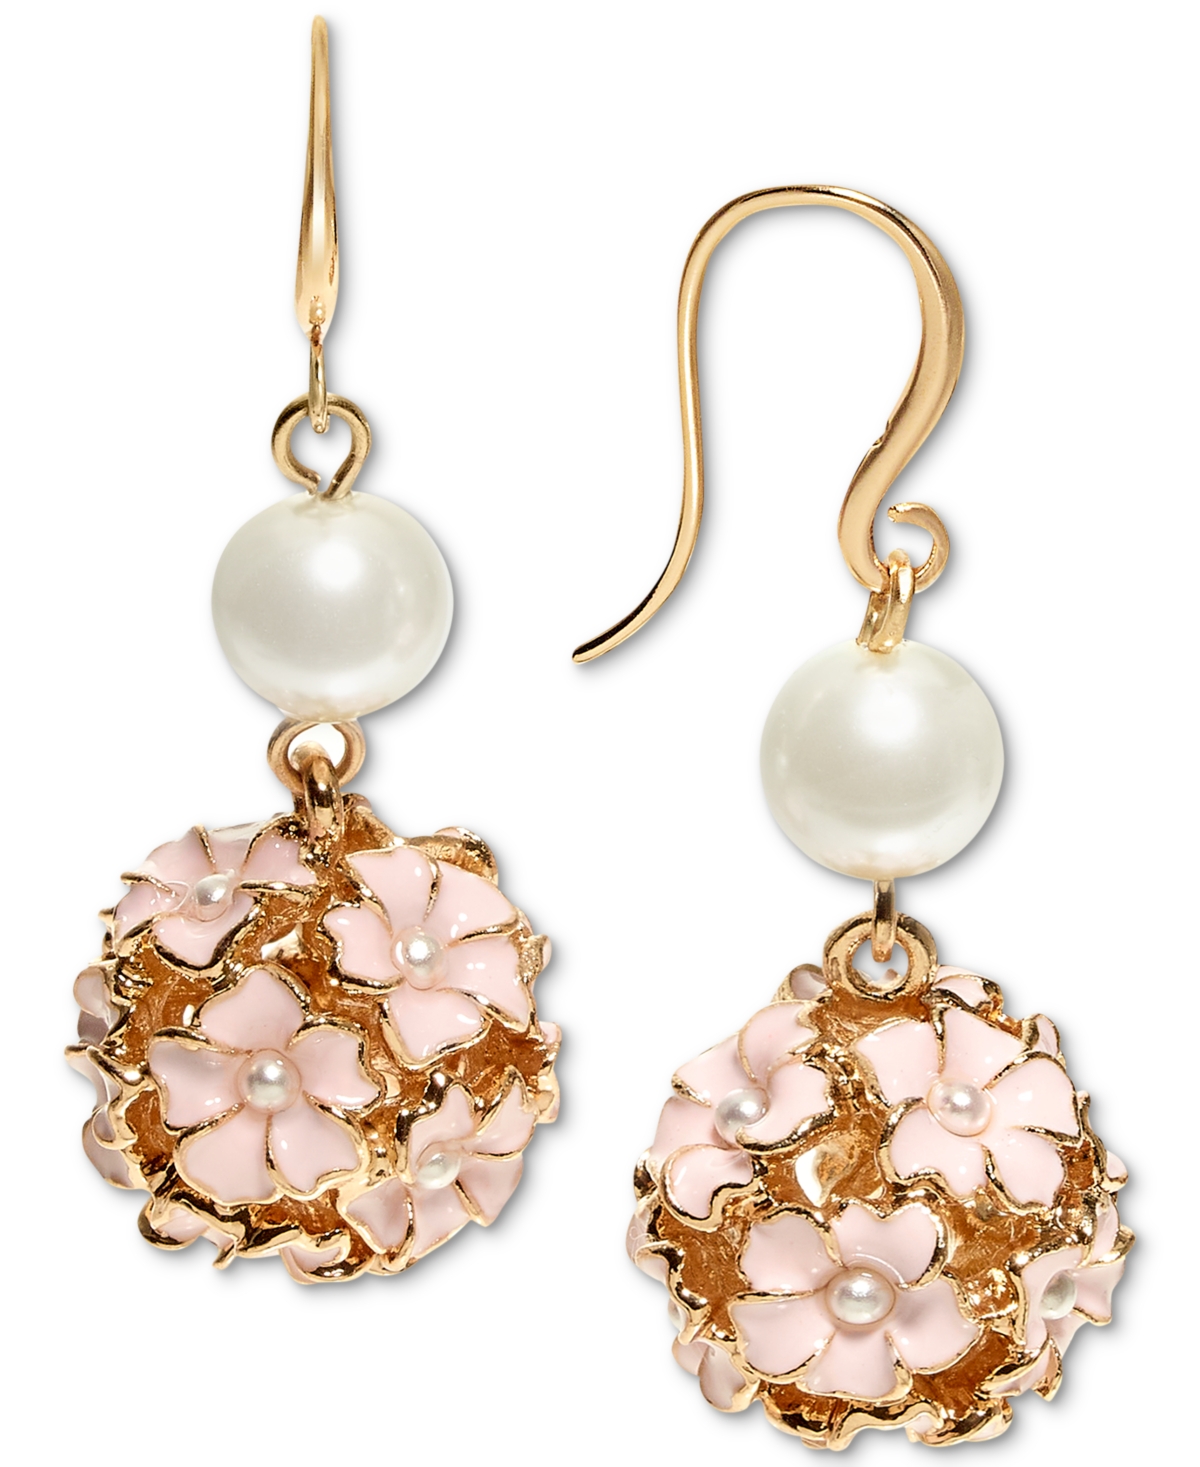 Gold-Tone Imitation Pearl & Color Flower Cluster Drop Earrings, Created for Macy's - Gold